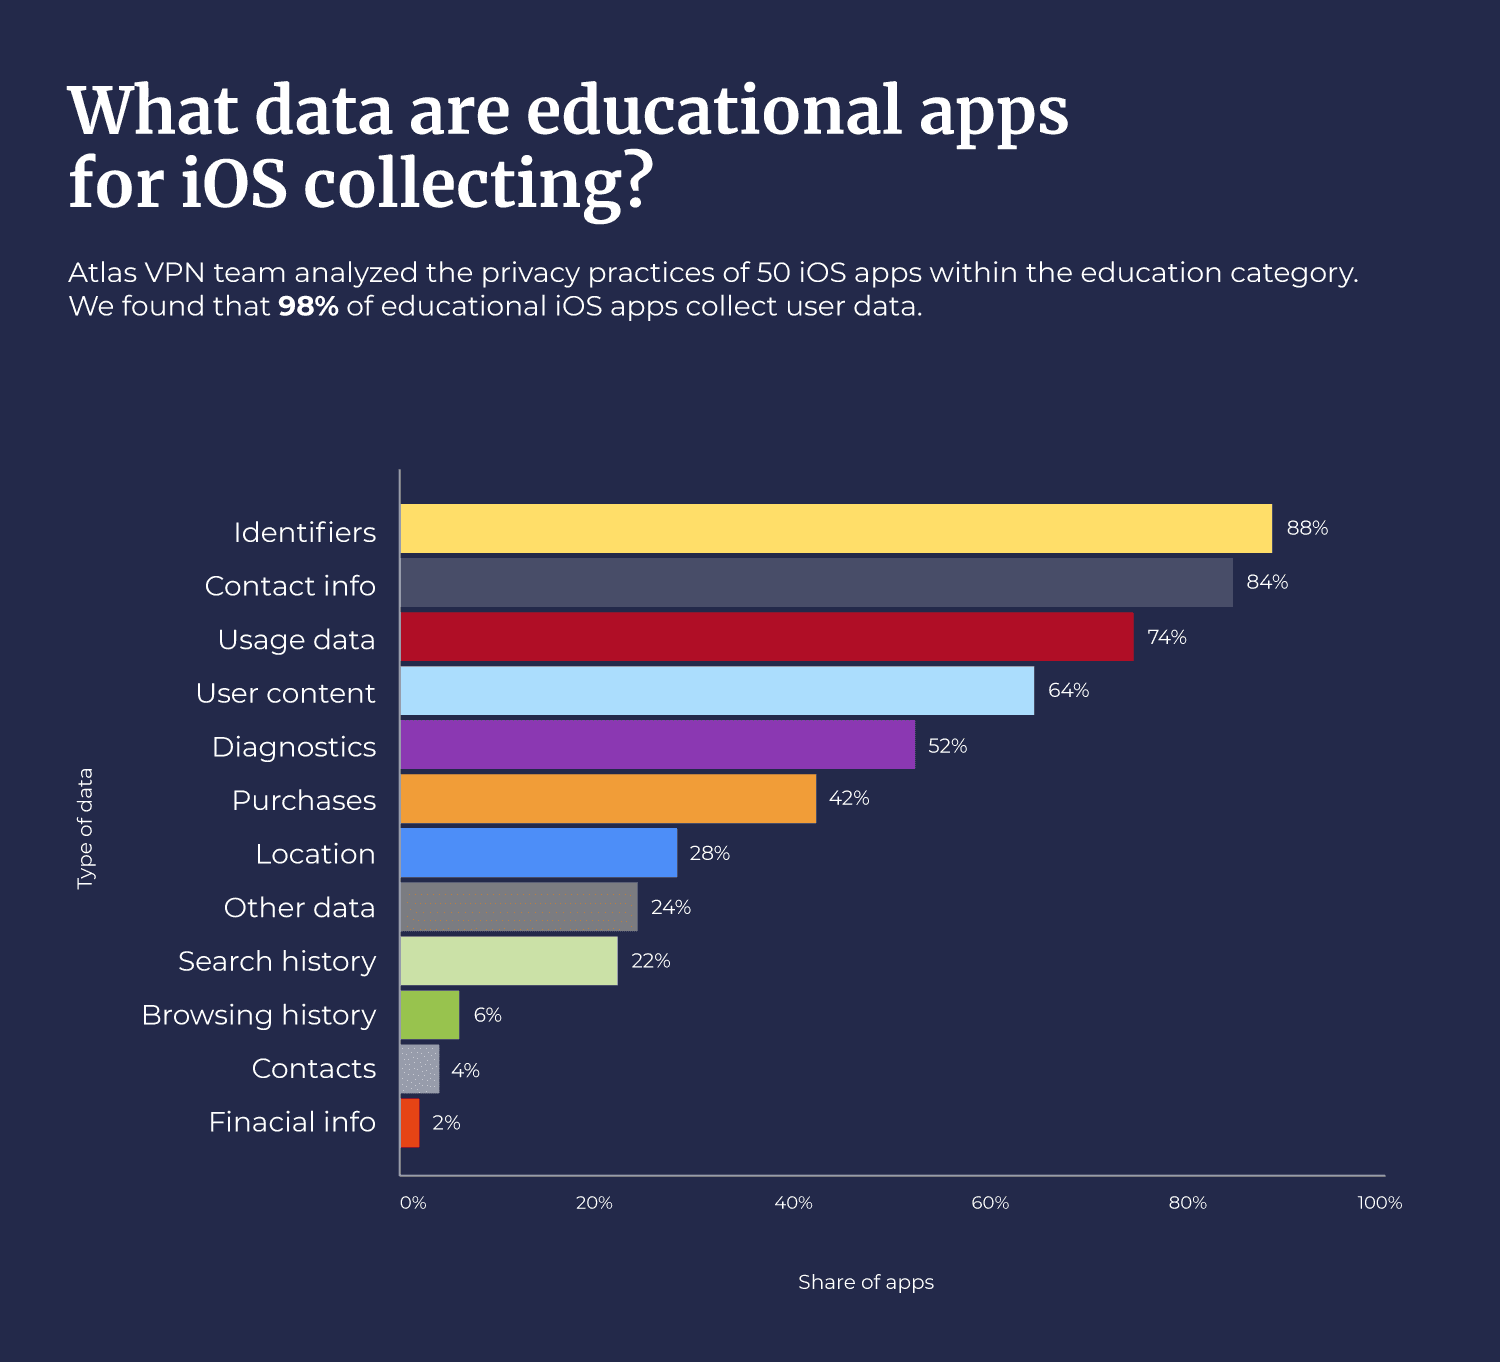 Top 10 Educational Apps On iOS That Are Sure To Invade Your Privacy